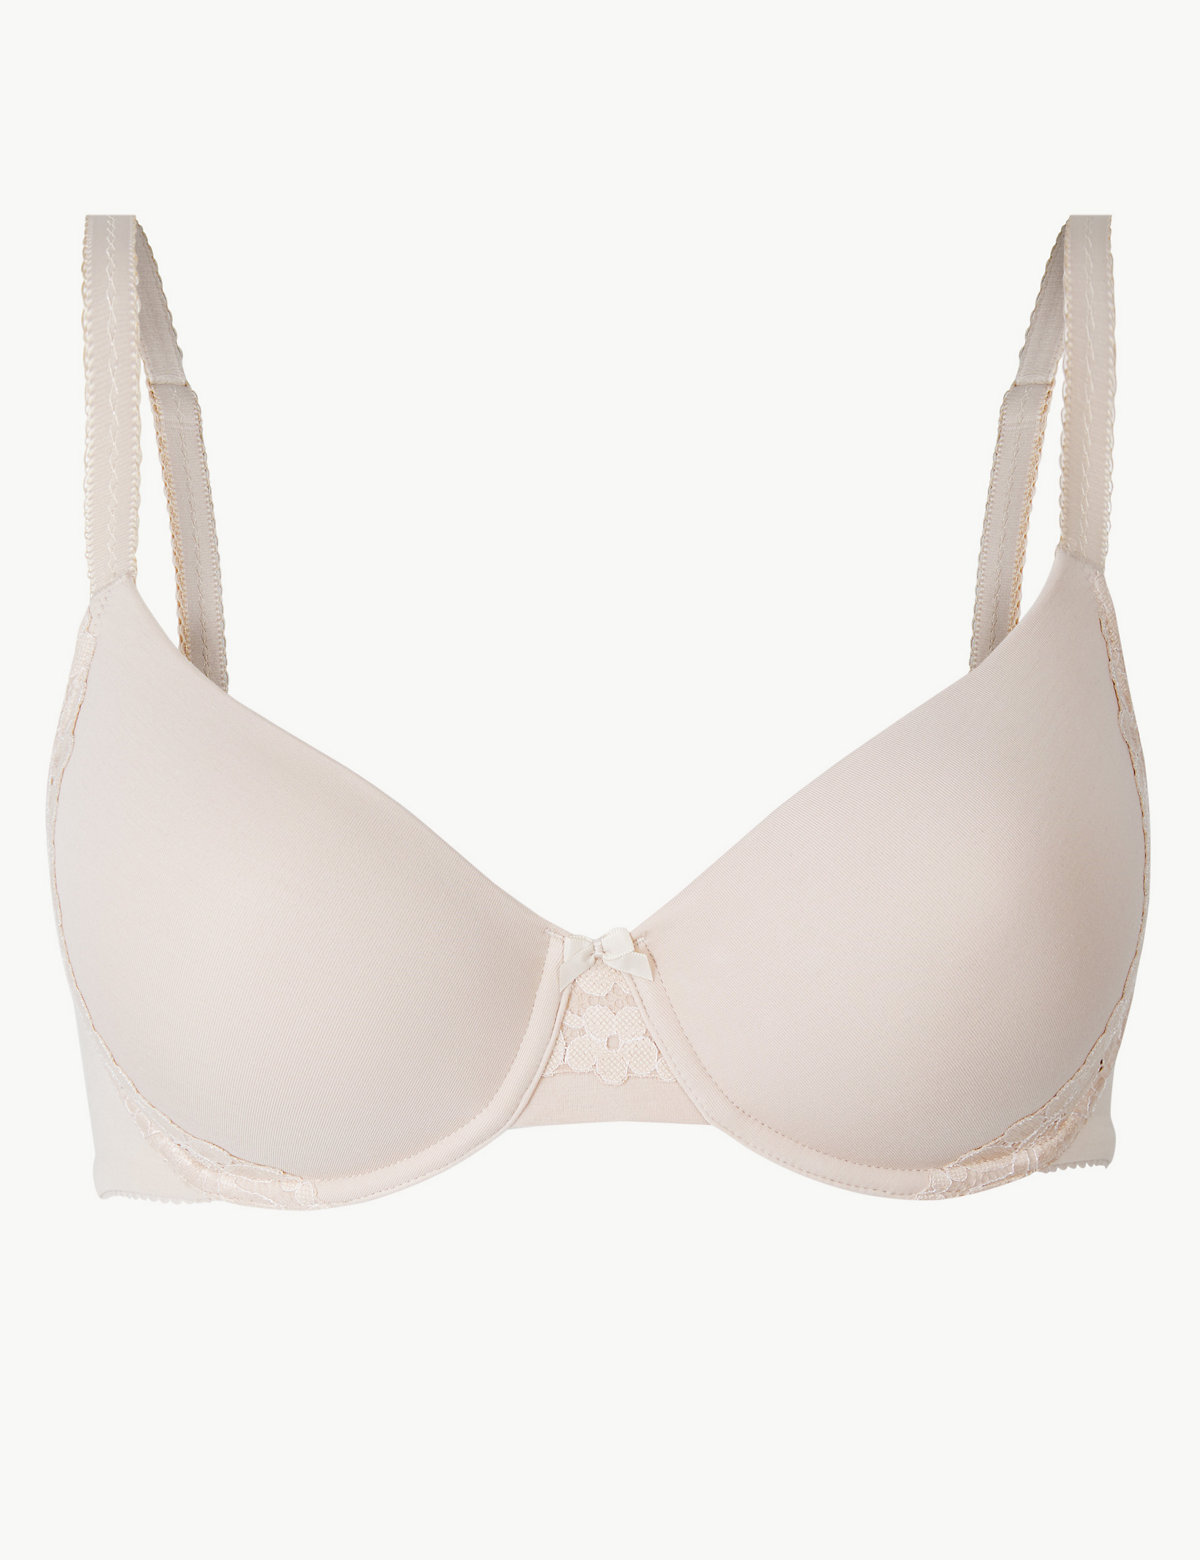 Cool Comfort™ Cotton Rich Padded Full Cup Bra A-E